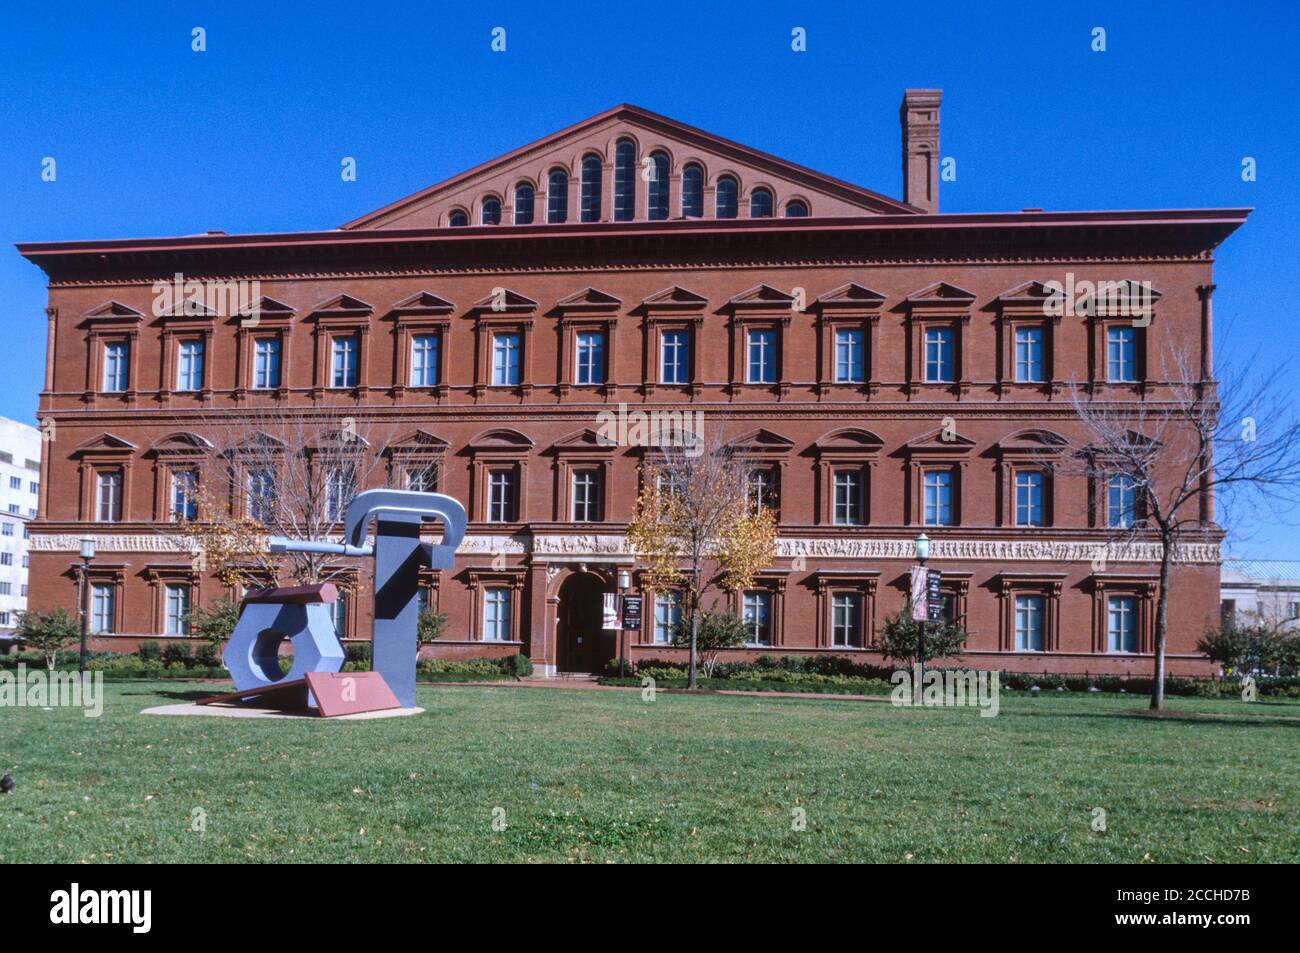 Washington, DC.  National Building Museum, formerly the Pension Building, for Civil War Veterans. Stock Photo